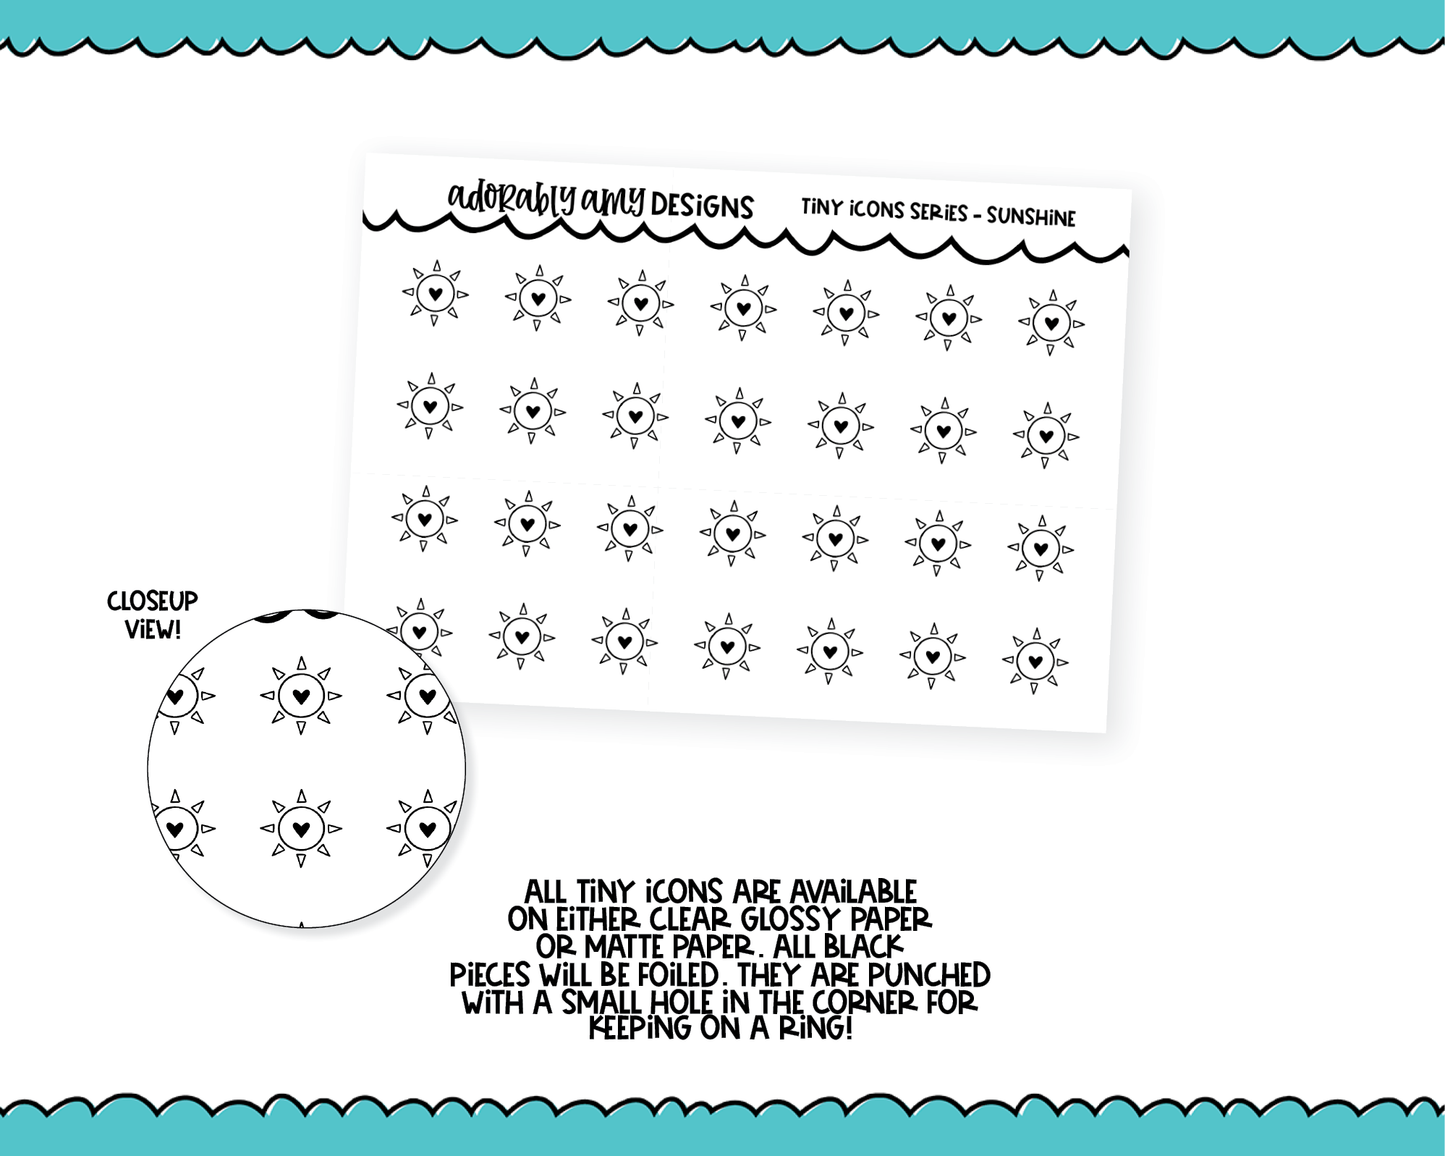 Foiled Tiny Icon Series - Sunshine Tiny Size Planner Stickers for any Planner or Insert